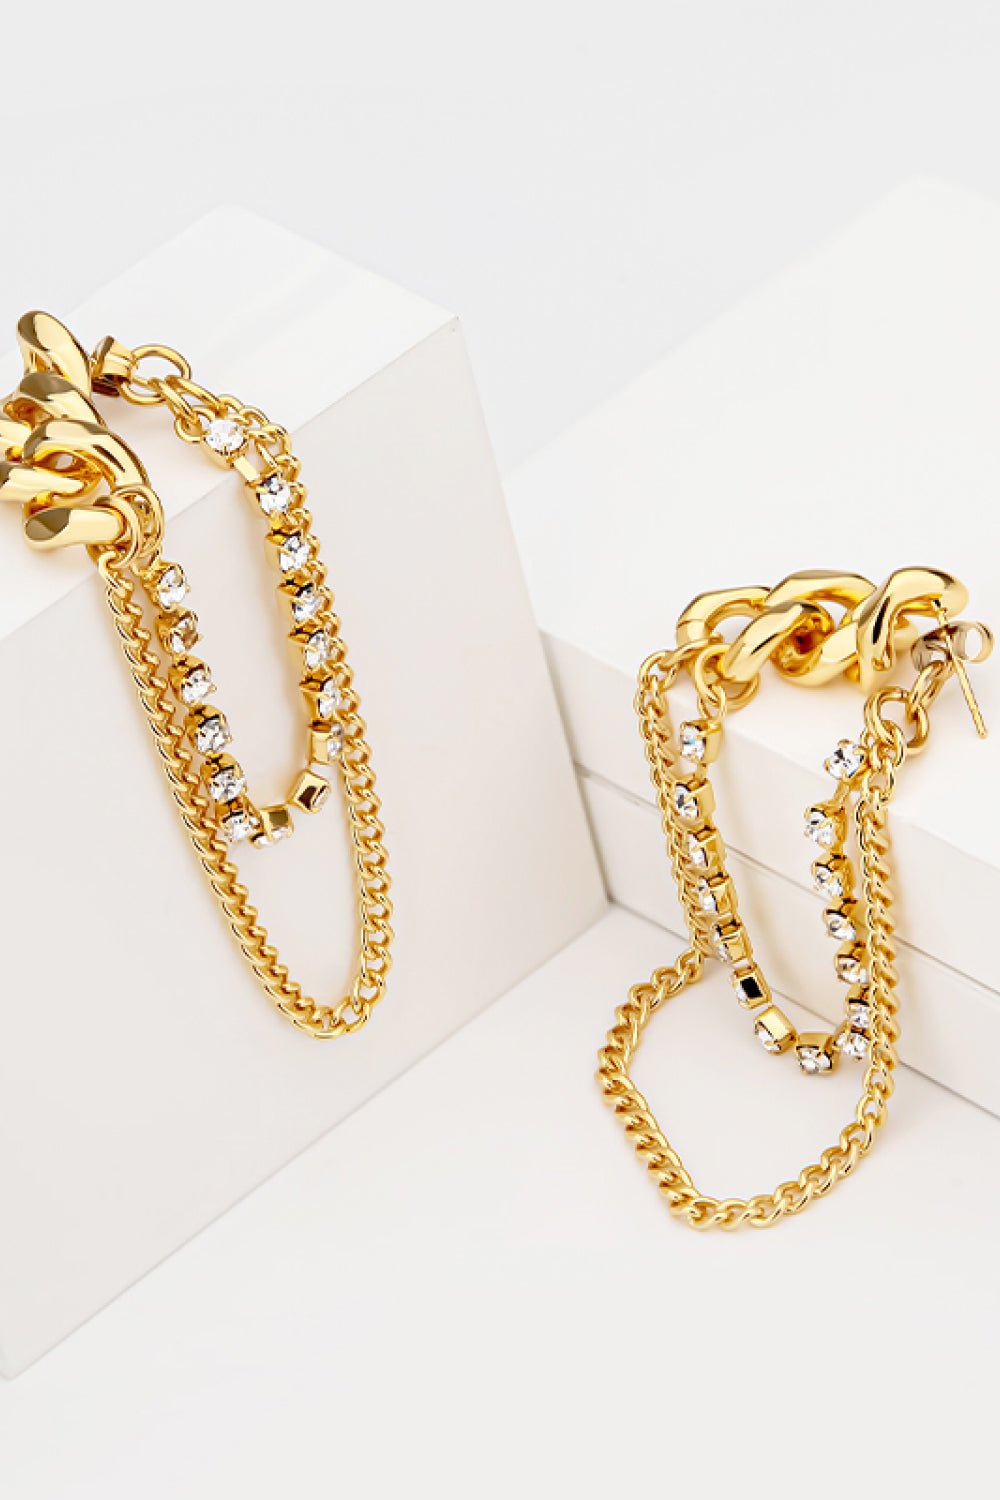 Rhinestone Copper Chain Earrings ONLINE ONLY - Beauty Junkee Collection